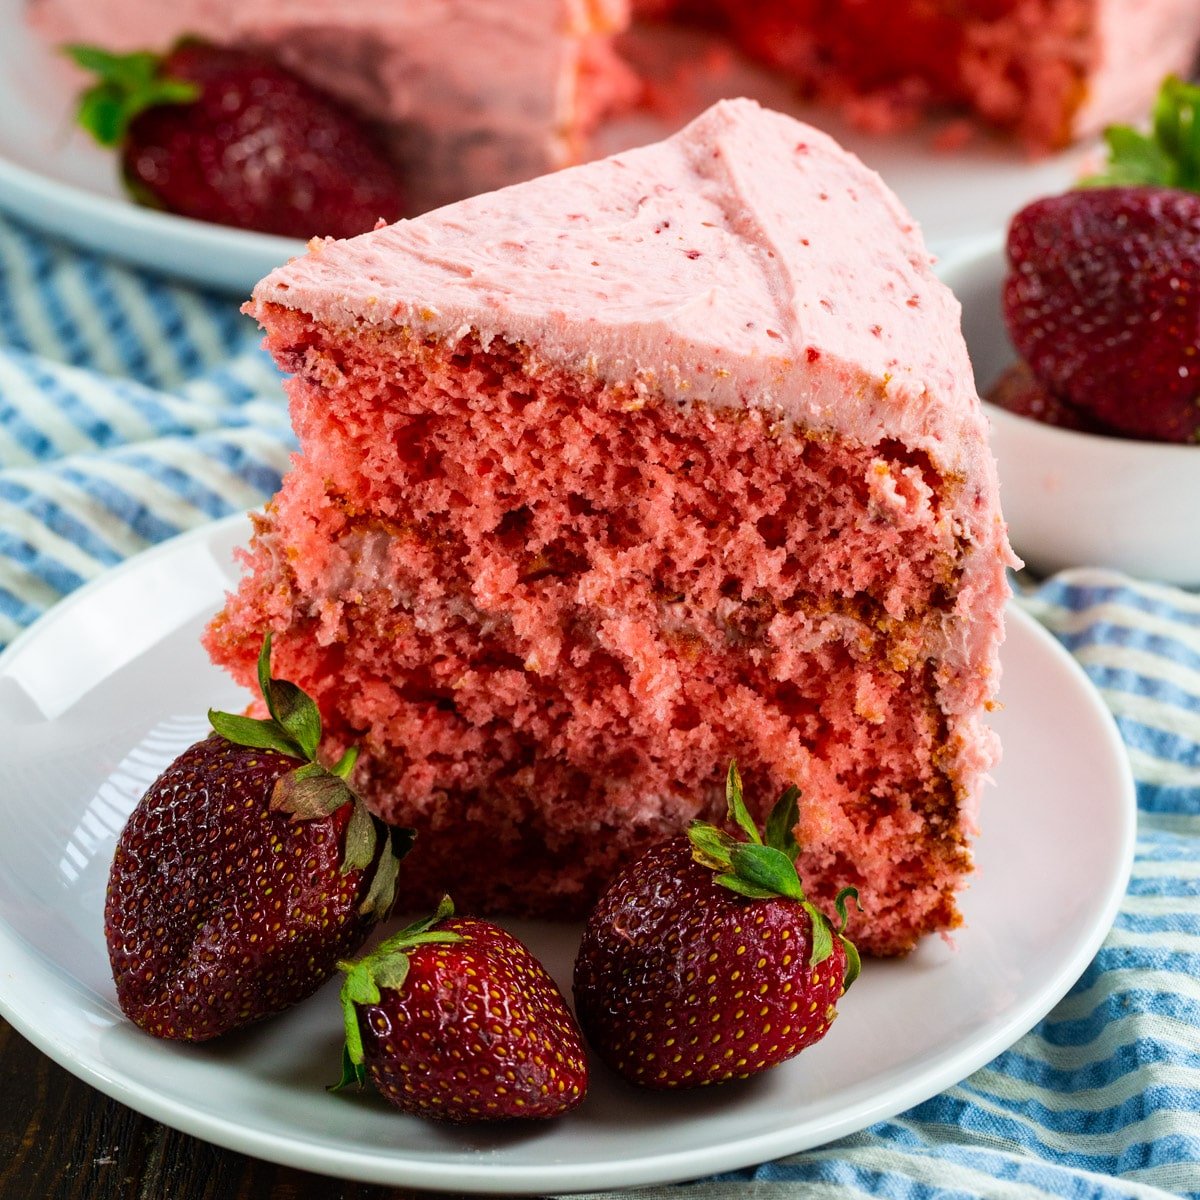 Slice of Strawberry Layer Cake on a plate with fresh strawberries.